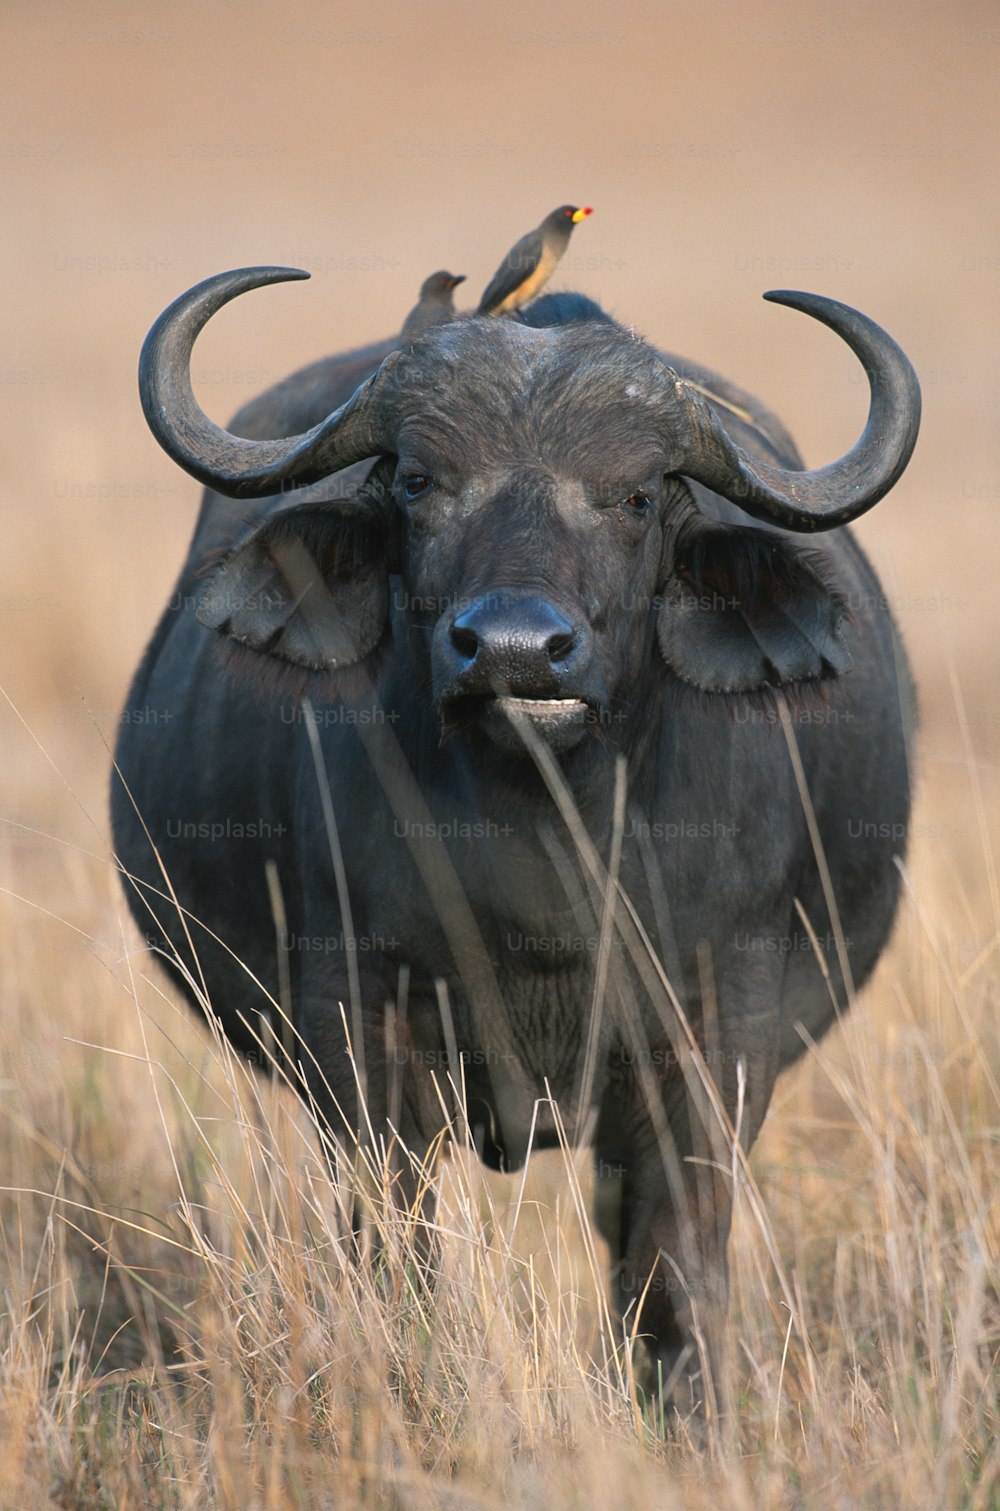 a bull with horns and a bird on its back